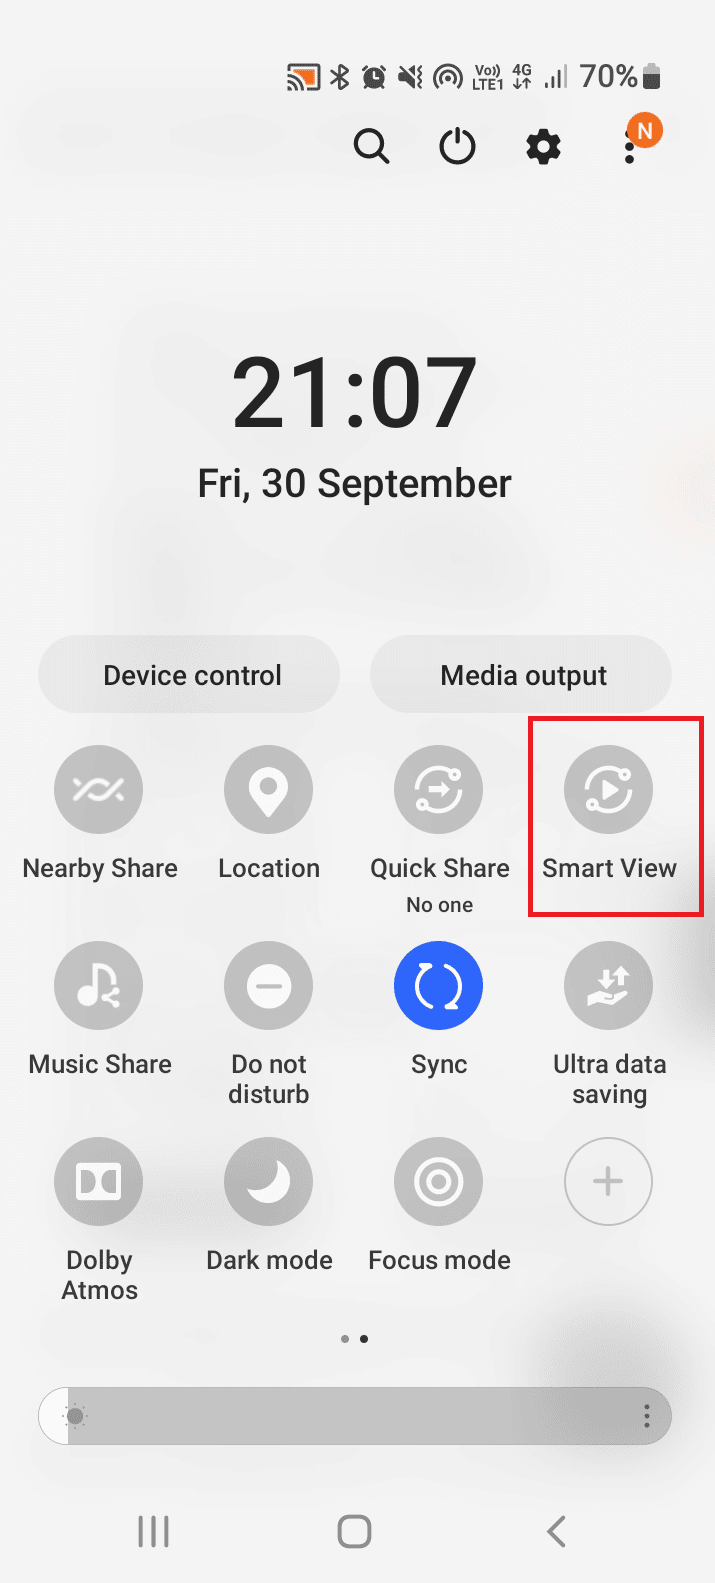 using the Smart View option